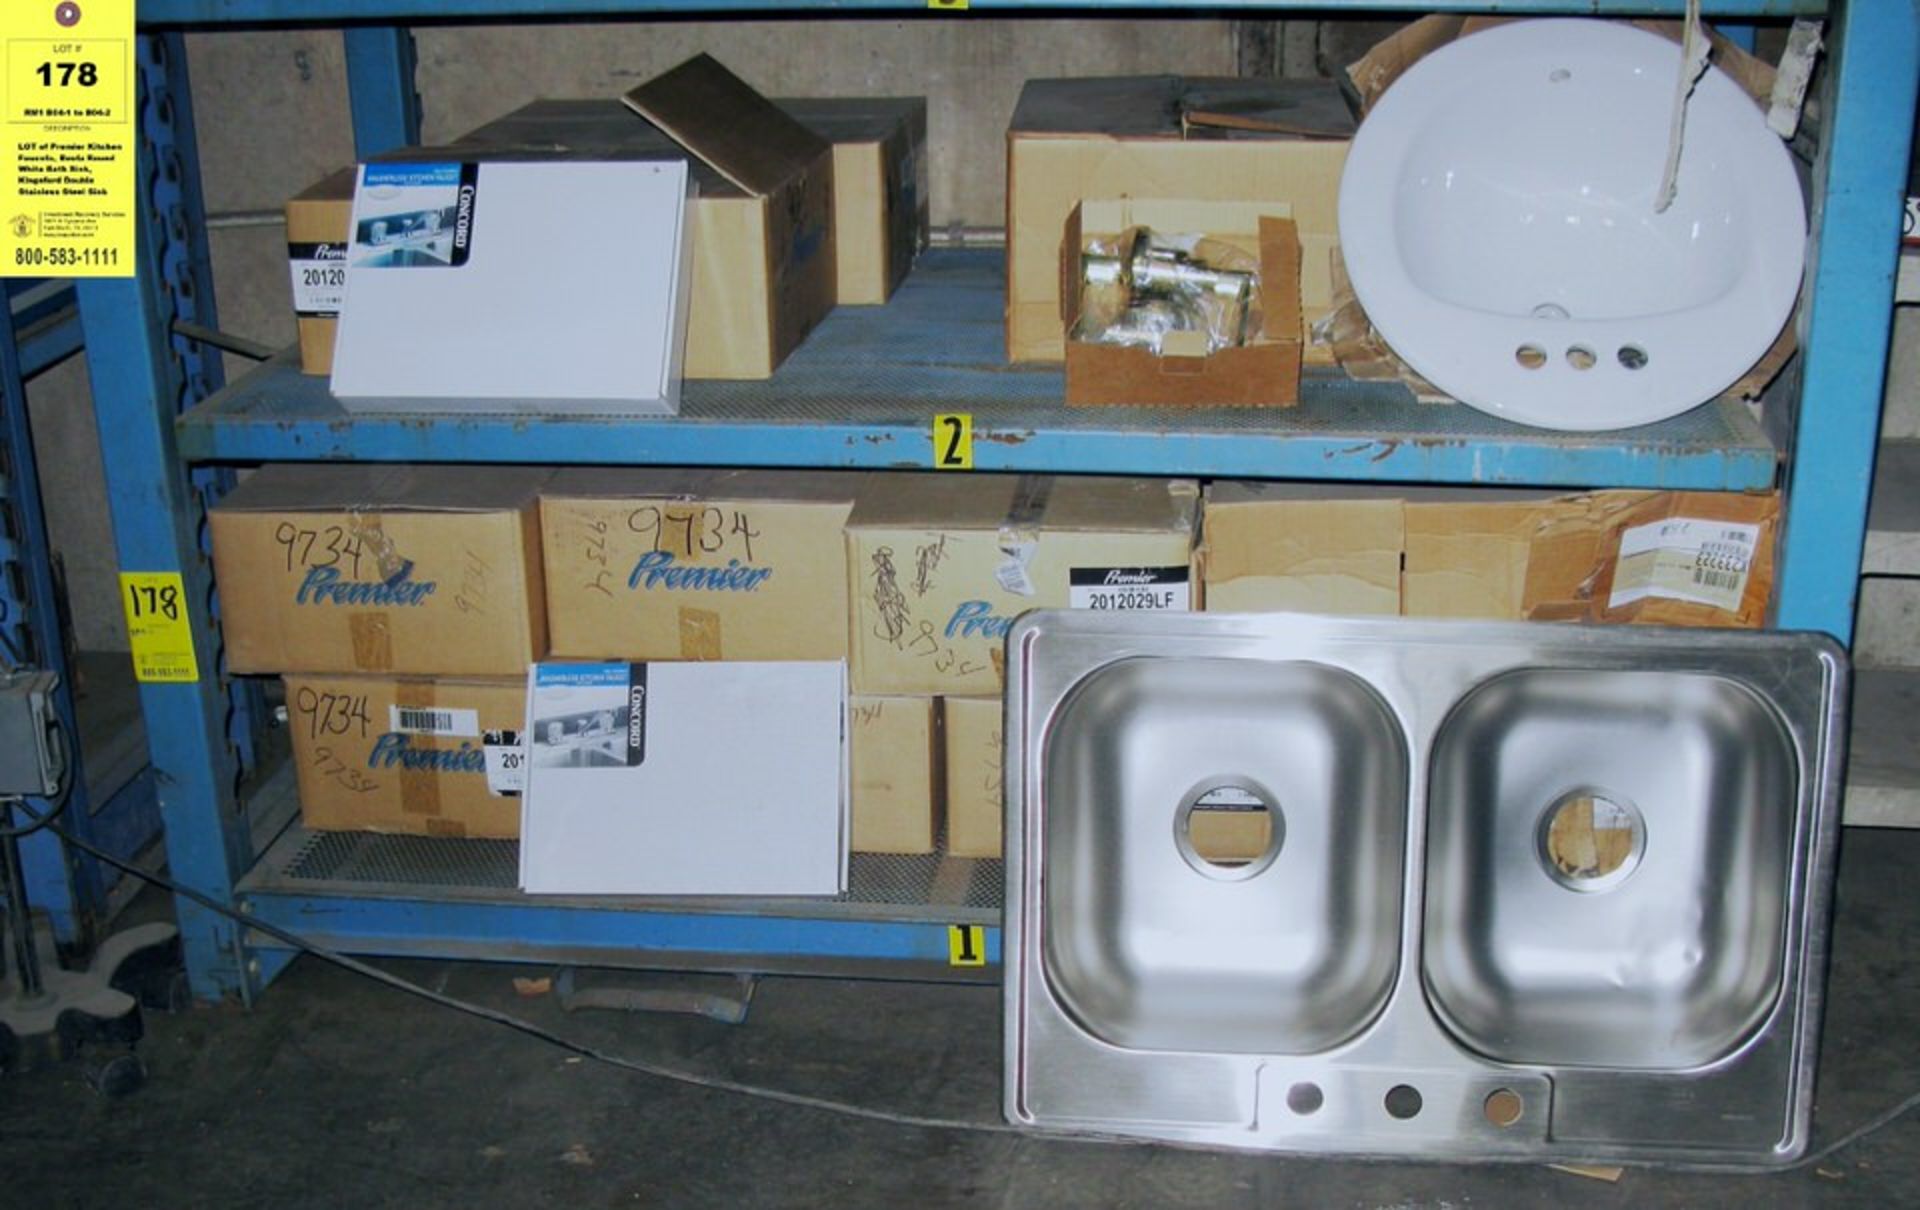 LOT of Premier Kitchen Faucets, Bootz Round White Bath Sink, Kingsford Double Stainless Steel Sink